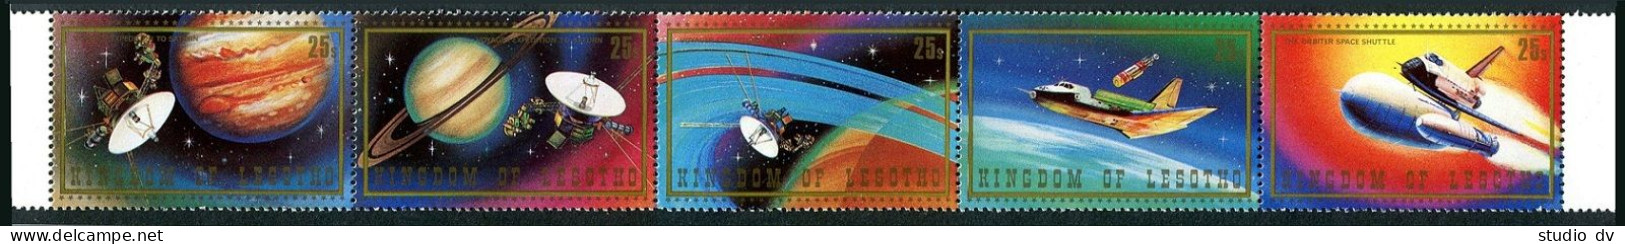 Lesotho 319 Ae Strip,MNH. Voyager Expedition To Saturn.Columbia Space Shuttle. - Lesotho (1966-...)